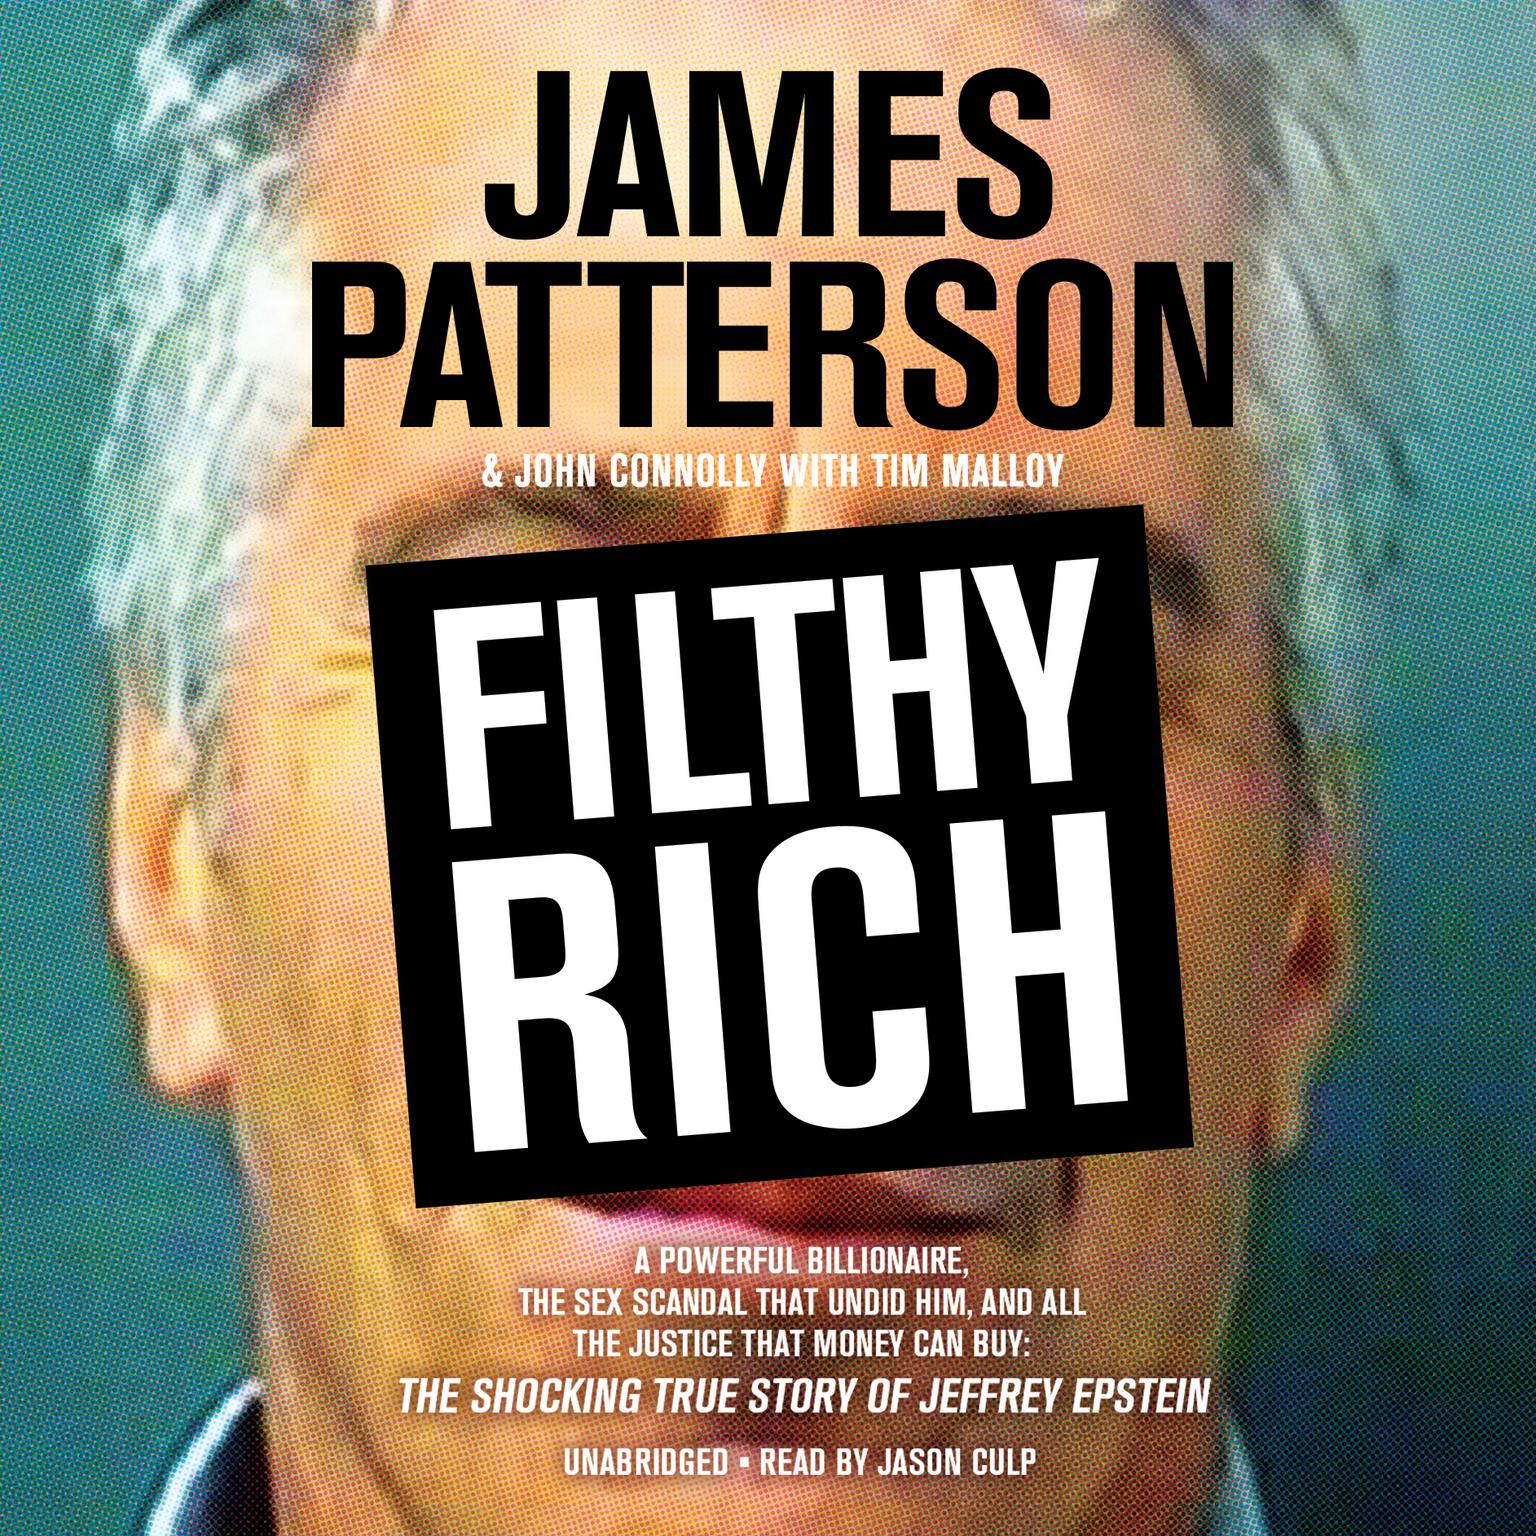 Filthy Rich: A Powerful Billionaire, the Sex Scandal that Undid Him, and All the Justice that Money Can Buy: The Shocking True Story of Jeffrey Epstein Audiobook, by James Patterson